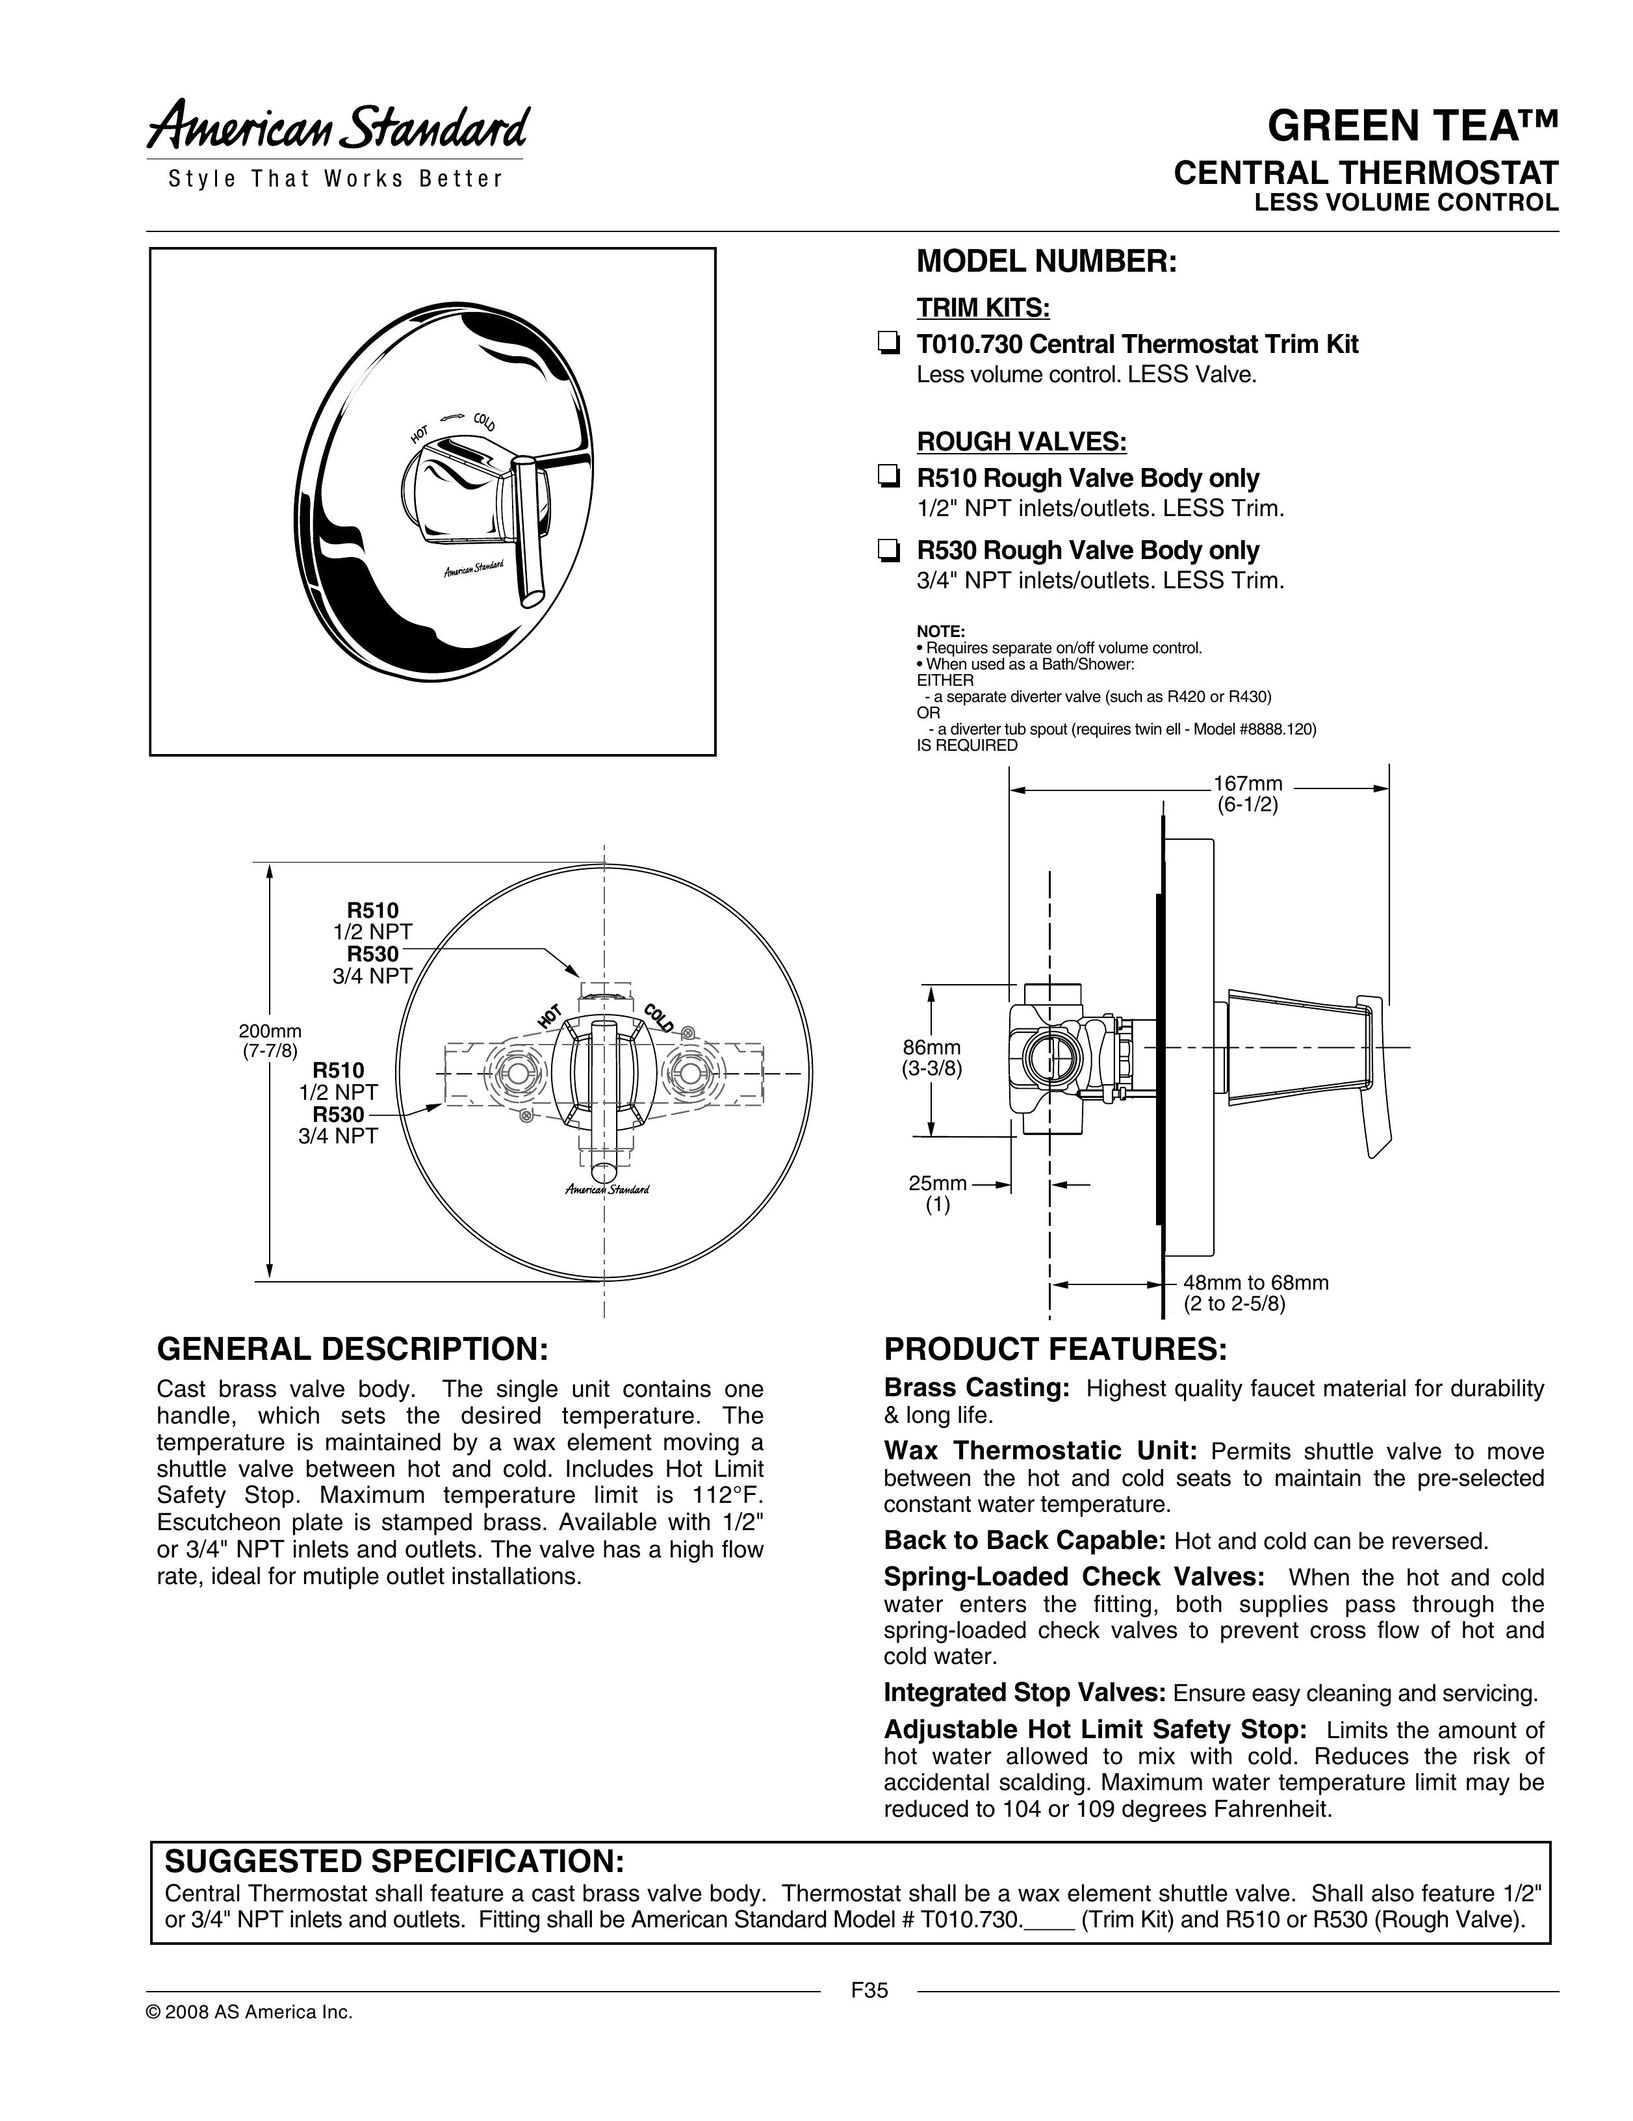 American Standard T010.730 Thermostat User Manual